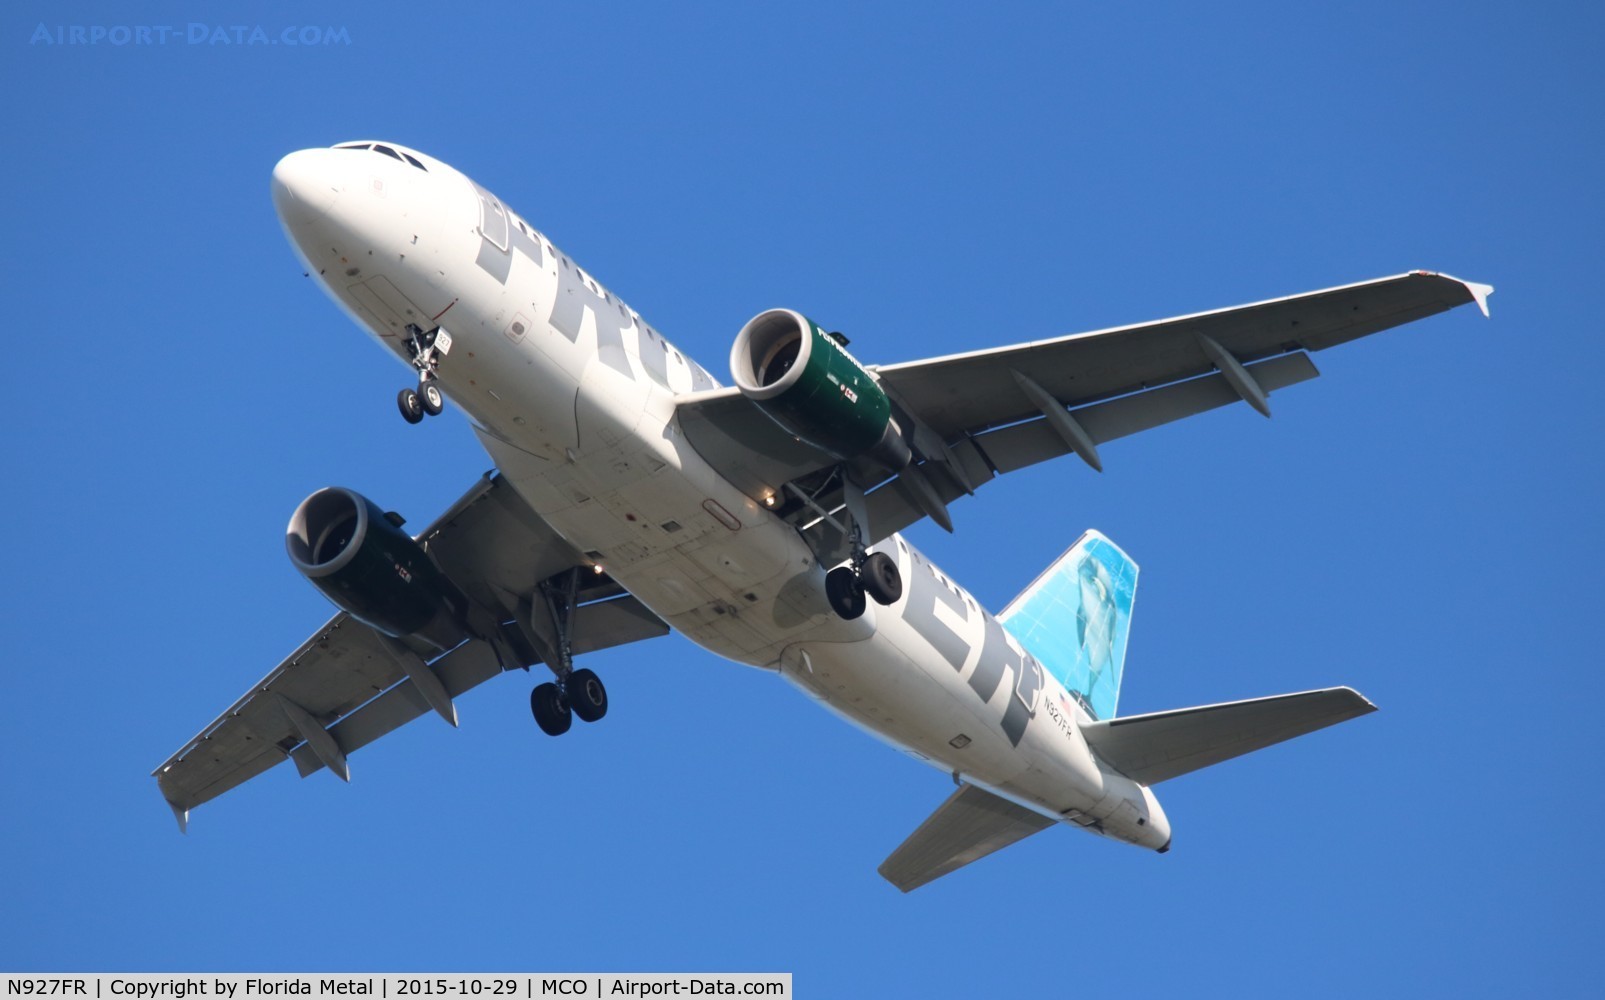 N927FR, 2004 Airbus A319-111 C/N 2209, Flip the Bottlenose Dolphin